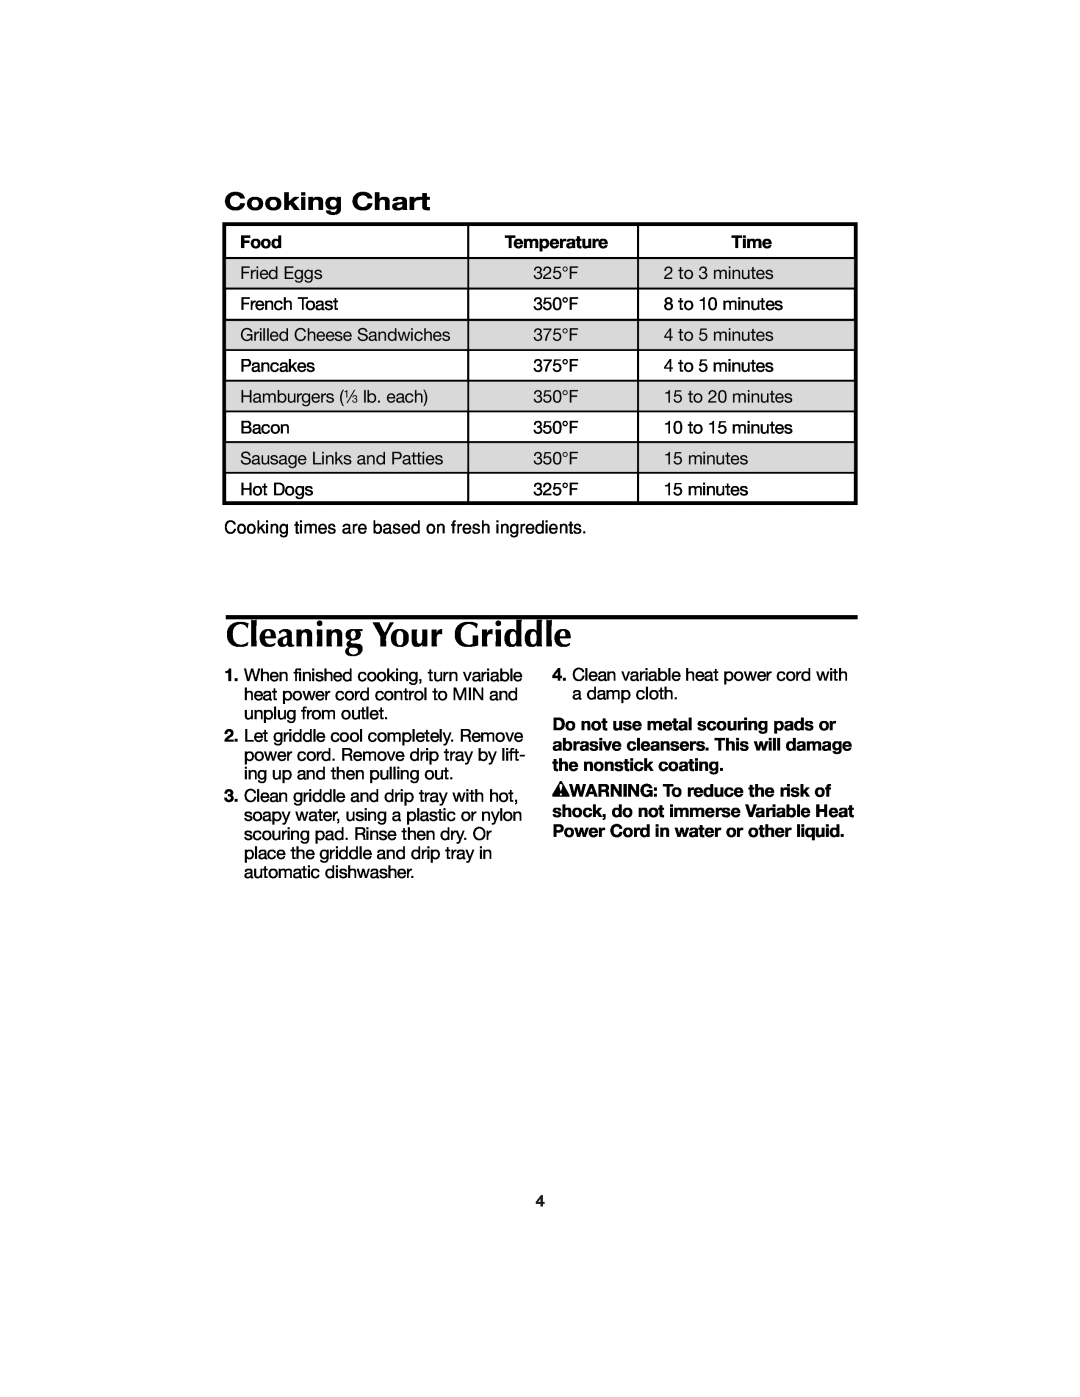 Hamilton Beach 840112100 manual Cleaning Your Griddle, Cooking Chart, Food, Temperature, Time 